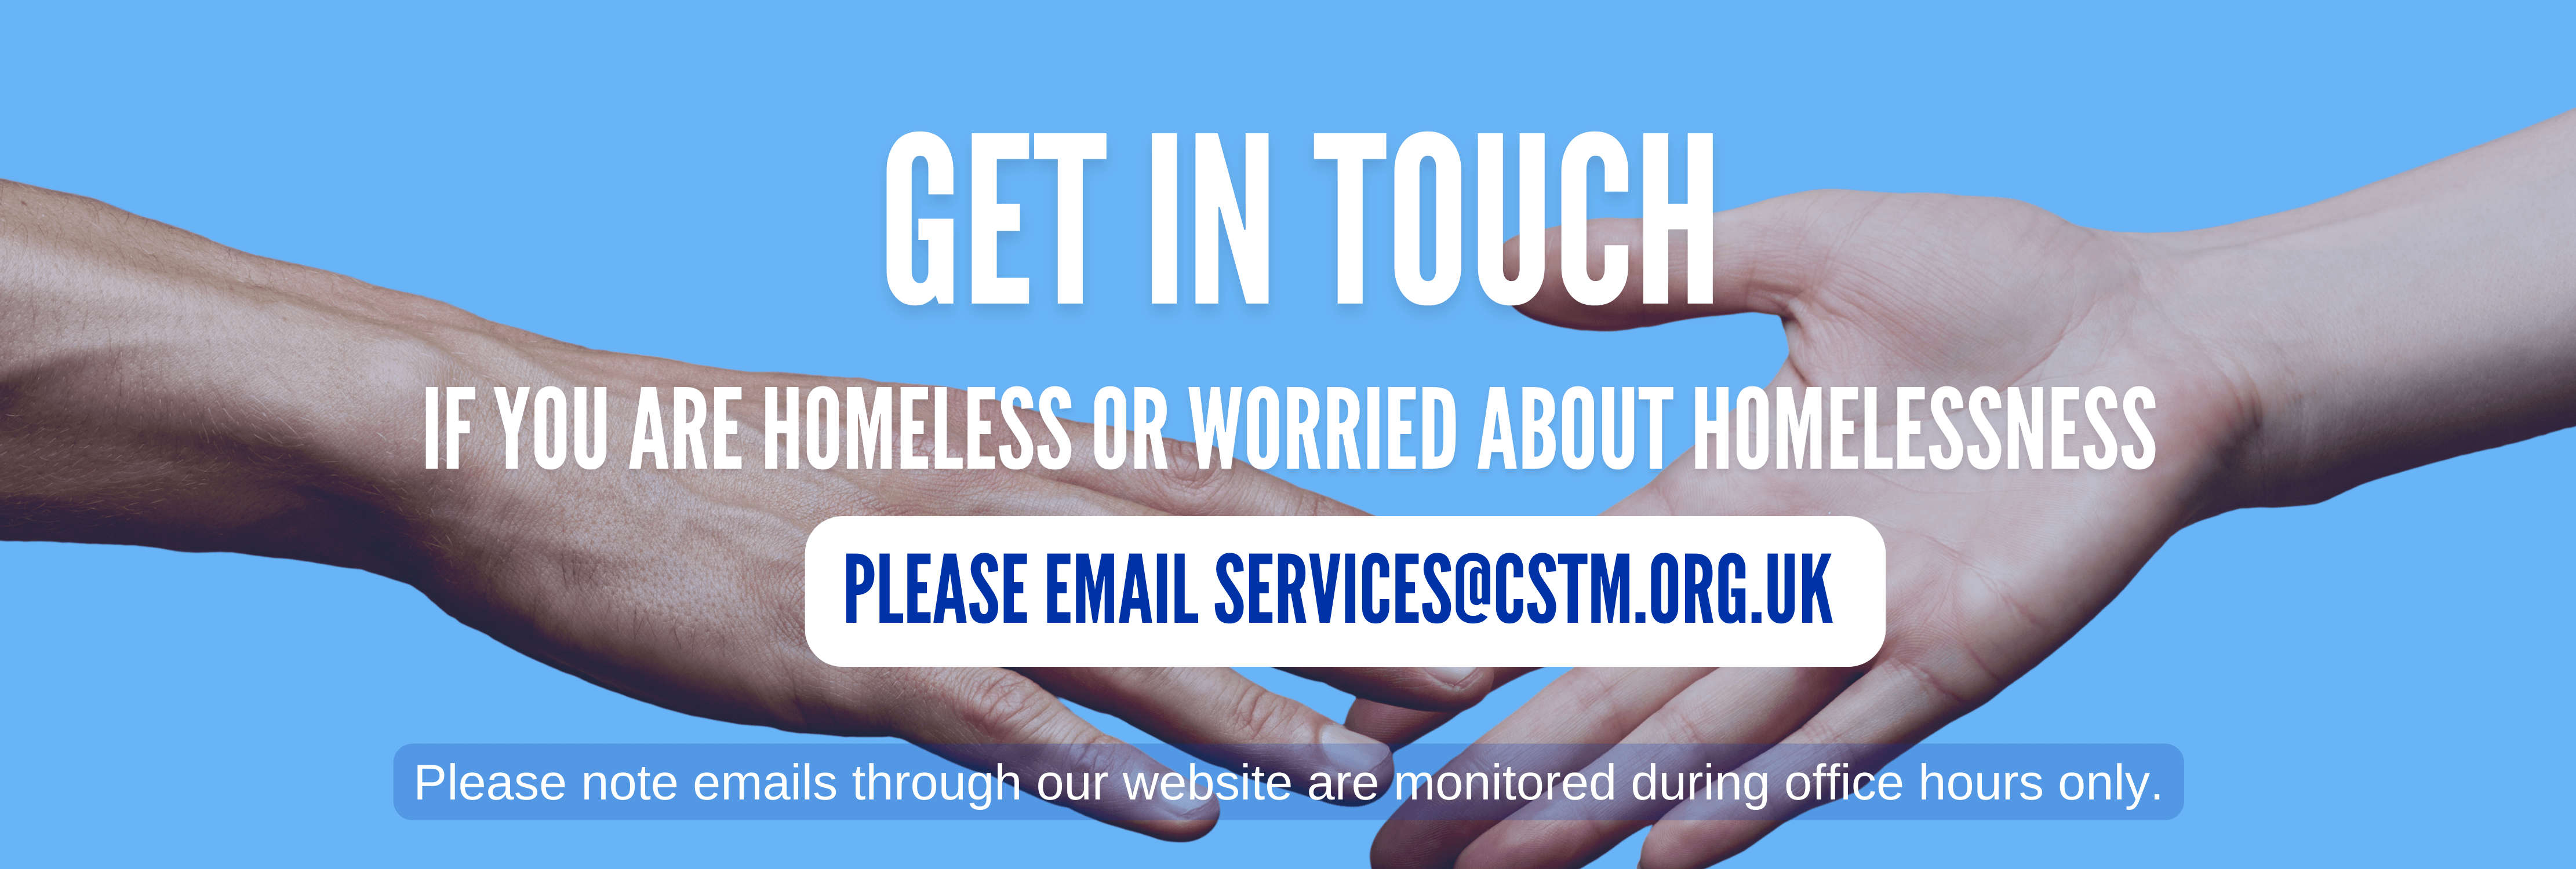 We provide services for people sleeping rough in central London. <strong>If you are homeless or worried about homelessness, please email services@cstm.org.uk or use the contact form below.</p>
<p>The Connection at St Martin’s provides a range of services and shelter for people who are rough sleeping as they recover from a life on the streets in central London. <strong>If you need help with homelessness, we’re here for you.</strong> email us at <a href=